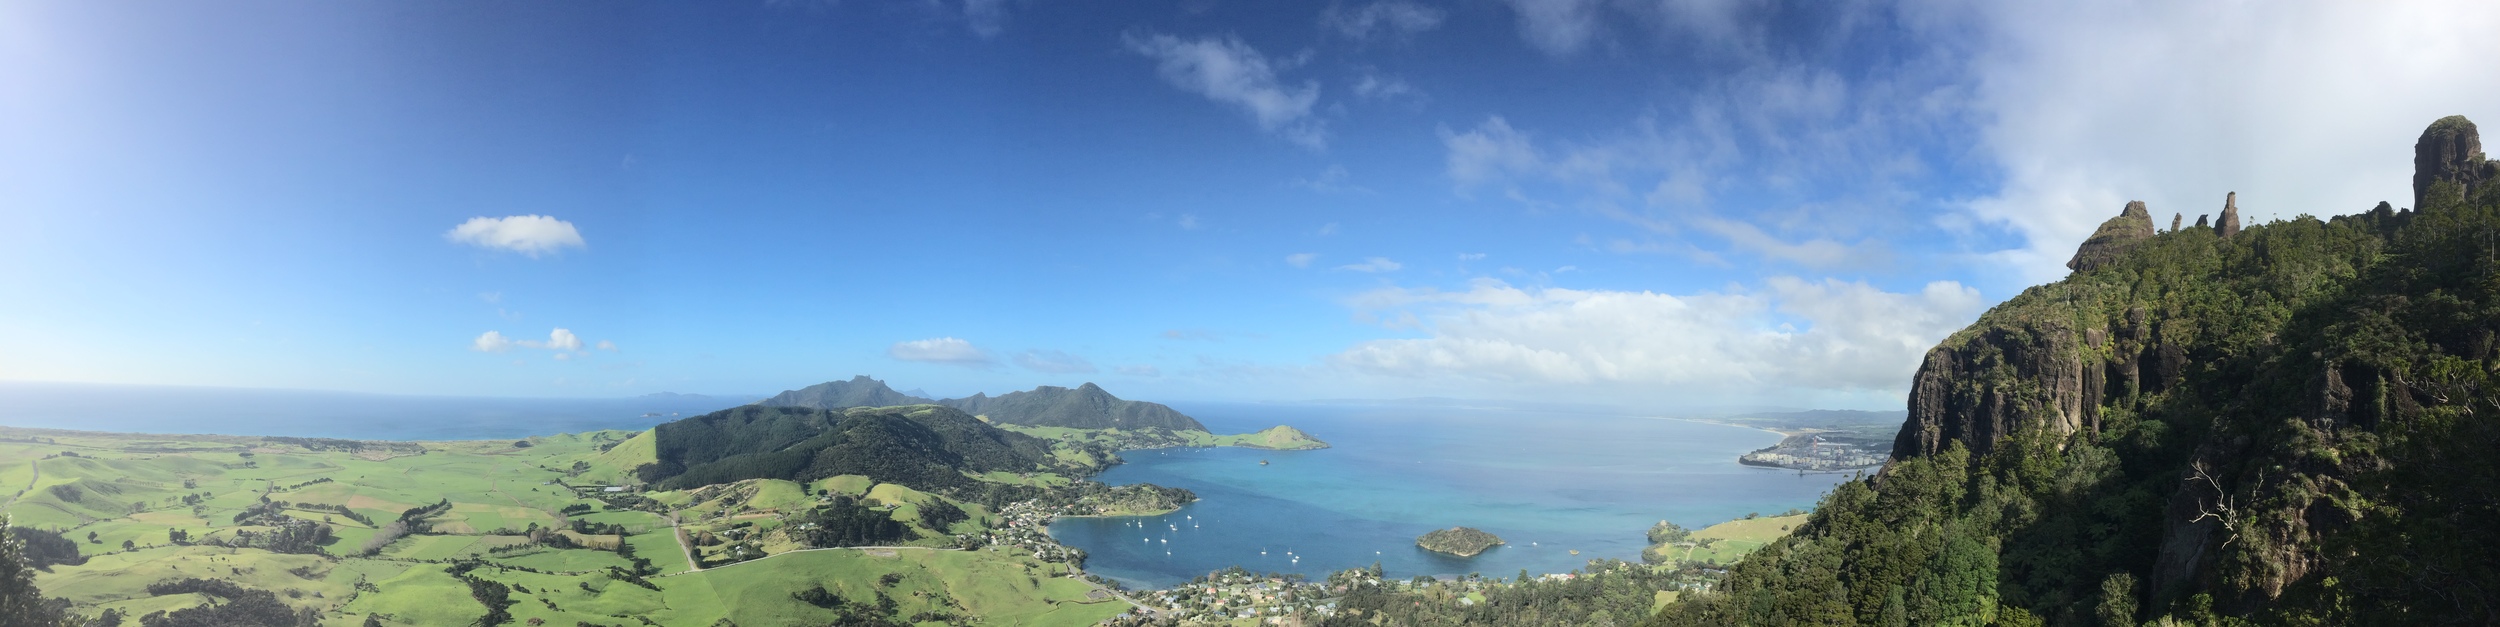 Looking out on the Whangarei Heads